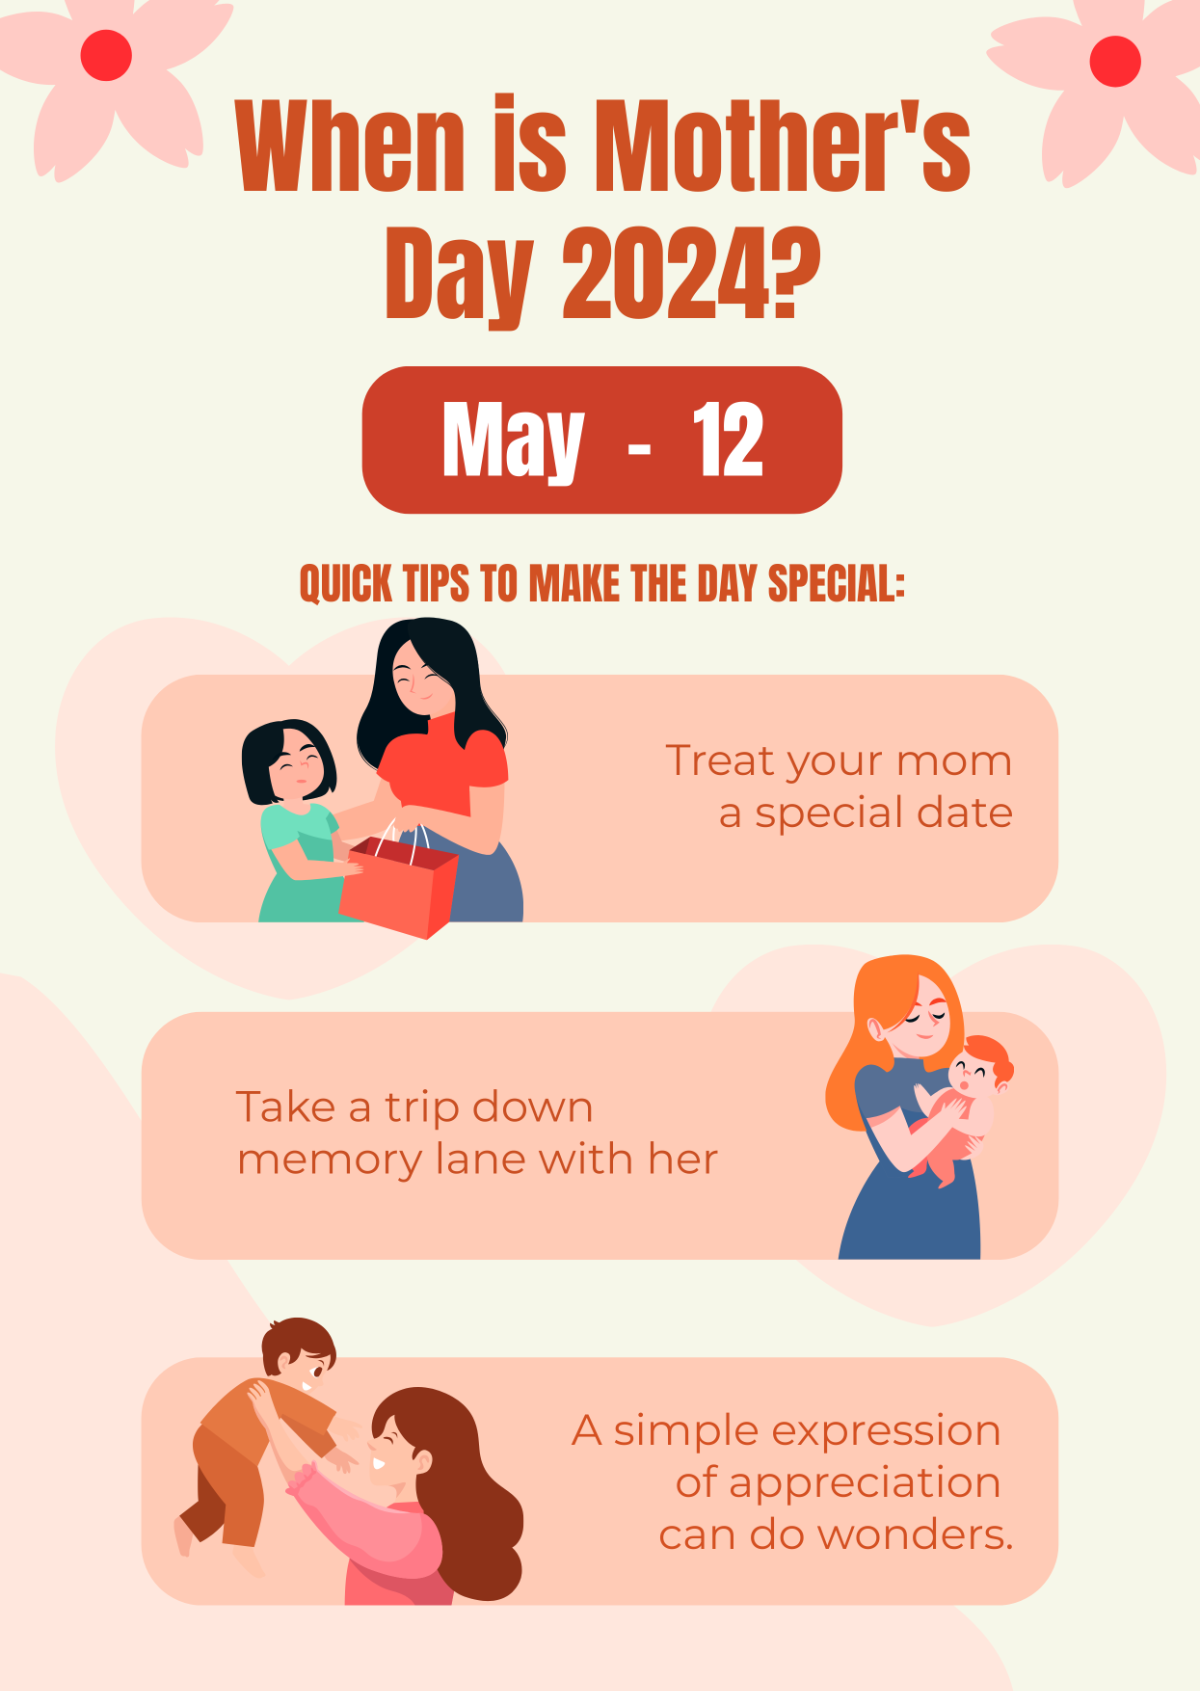 When is Mother's Day 2024?